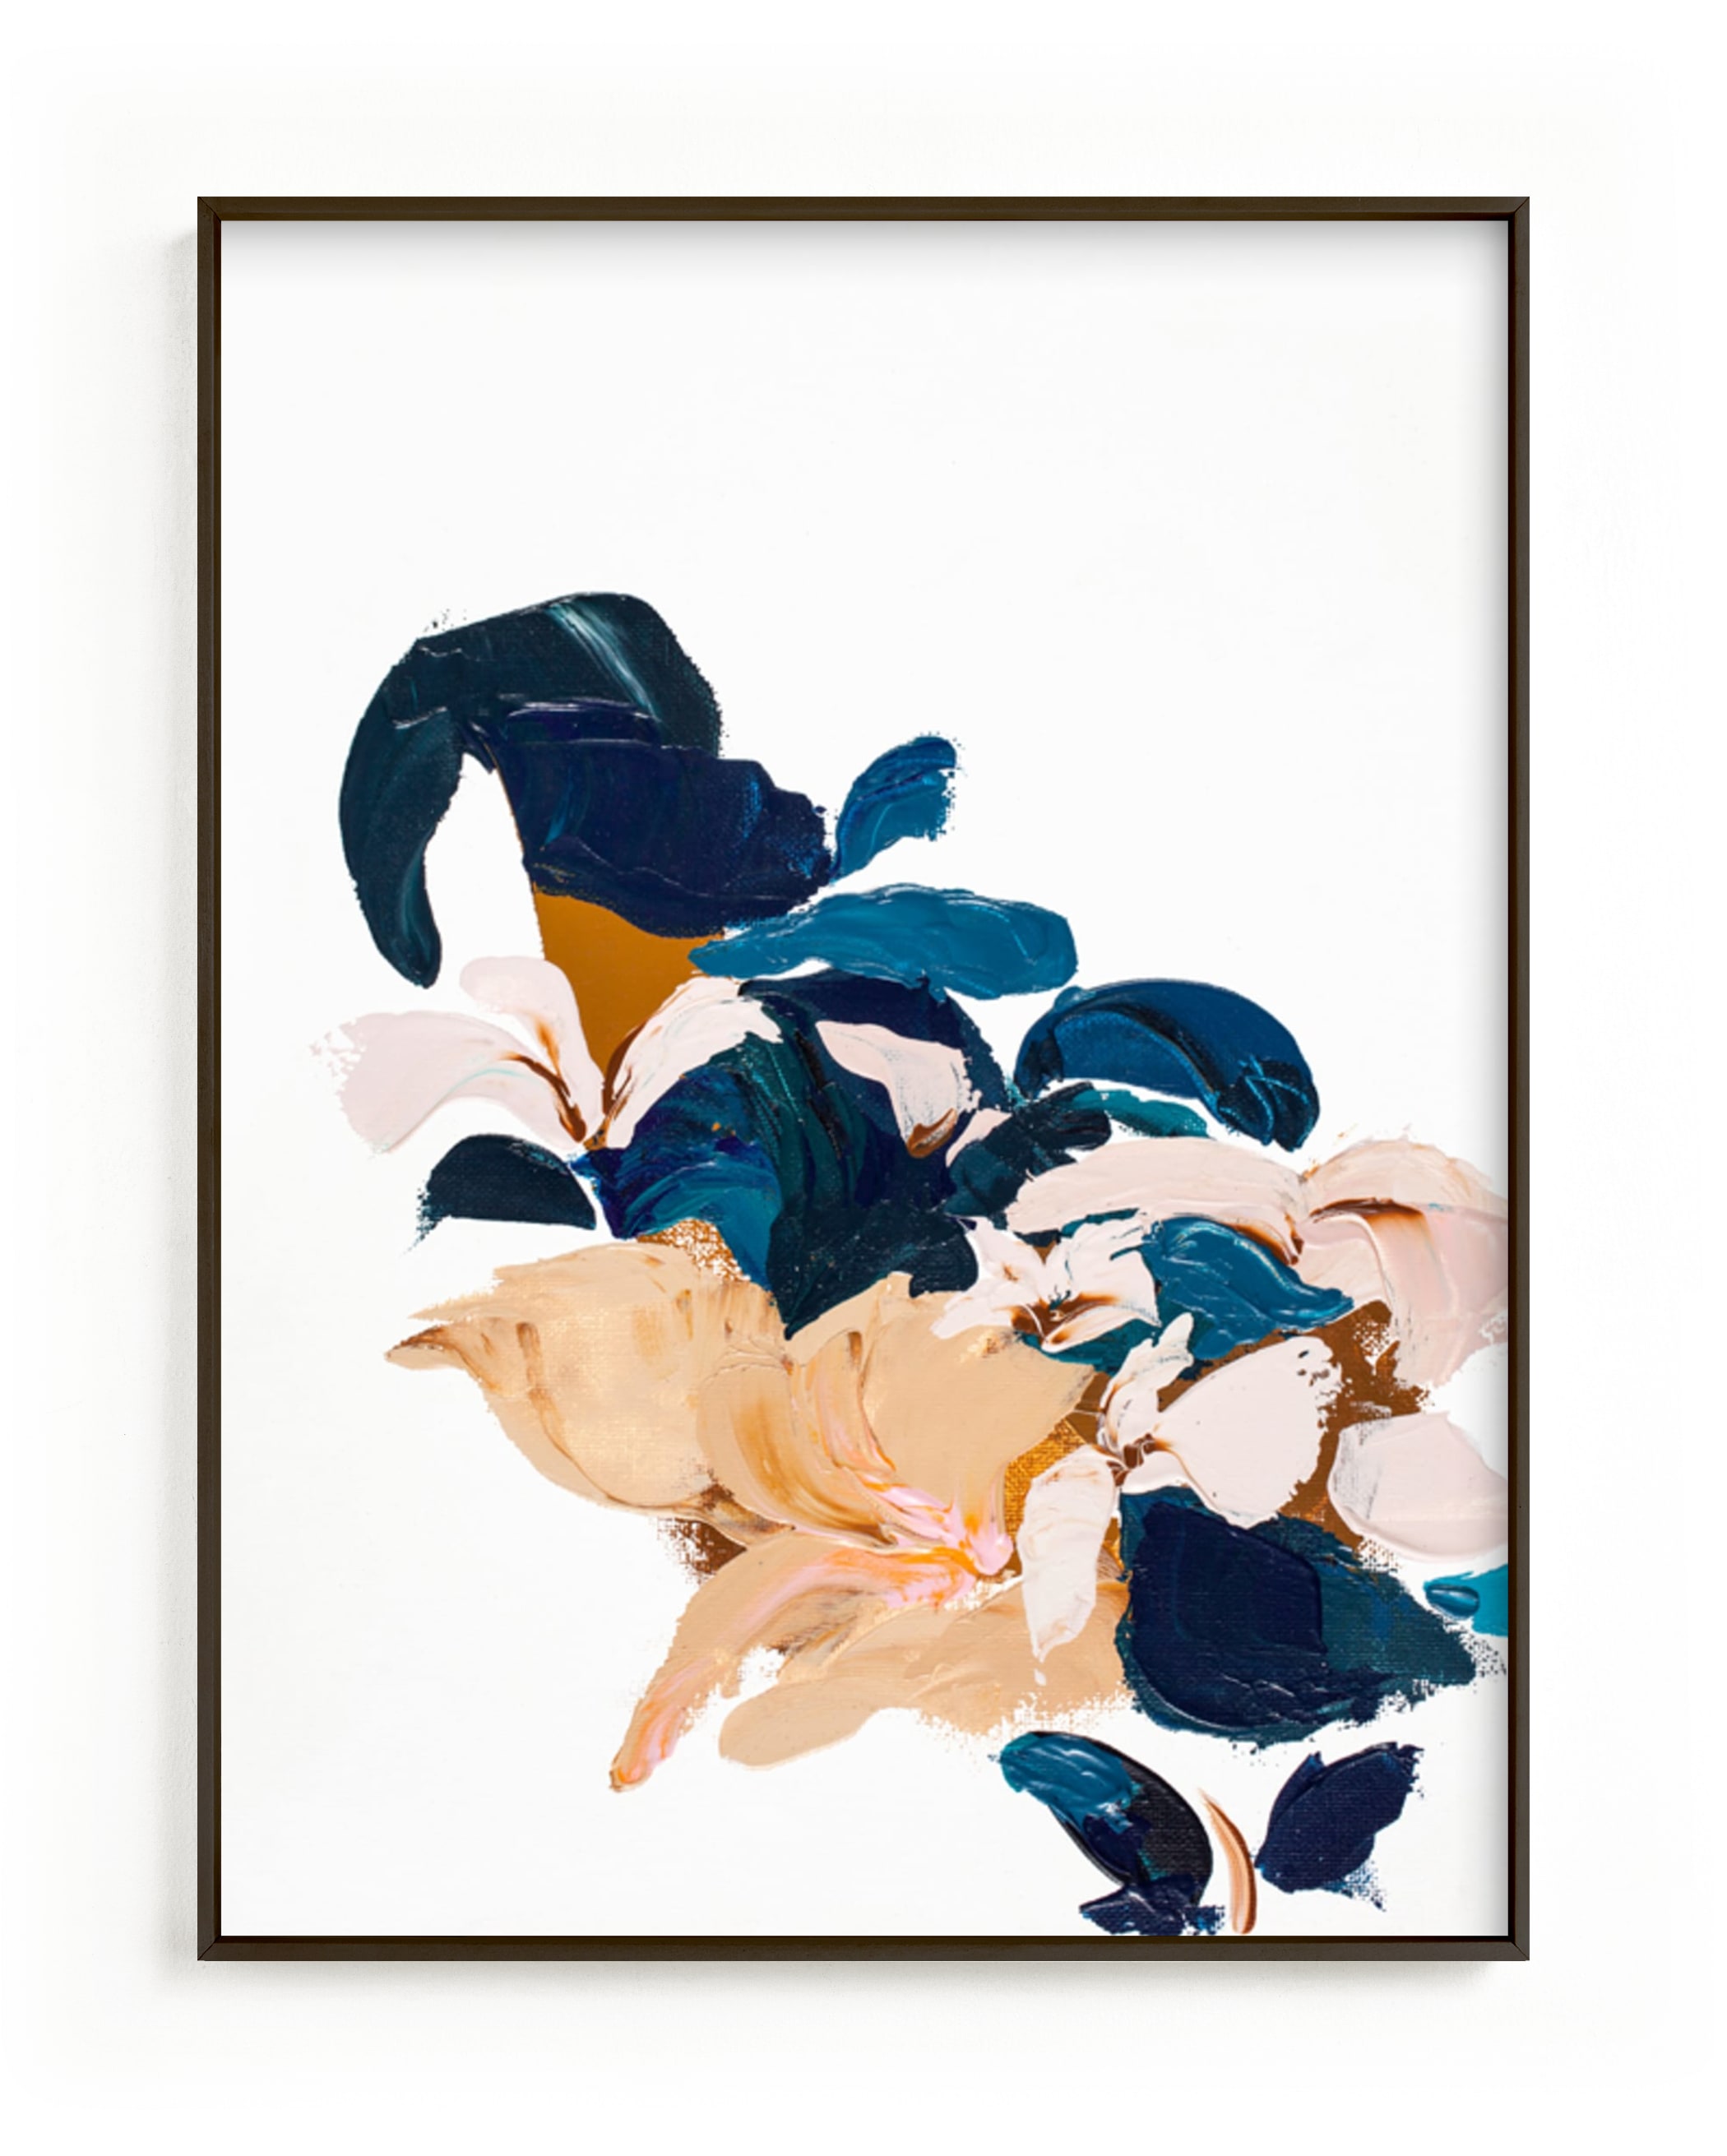 "Abstract Botanical" - Painting Art Print by Caryn Owen.